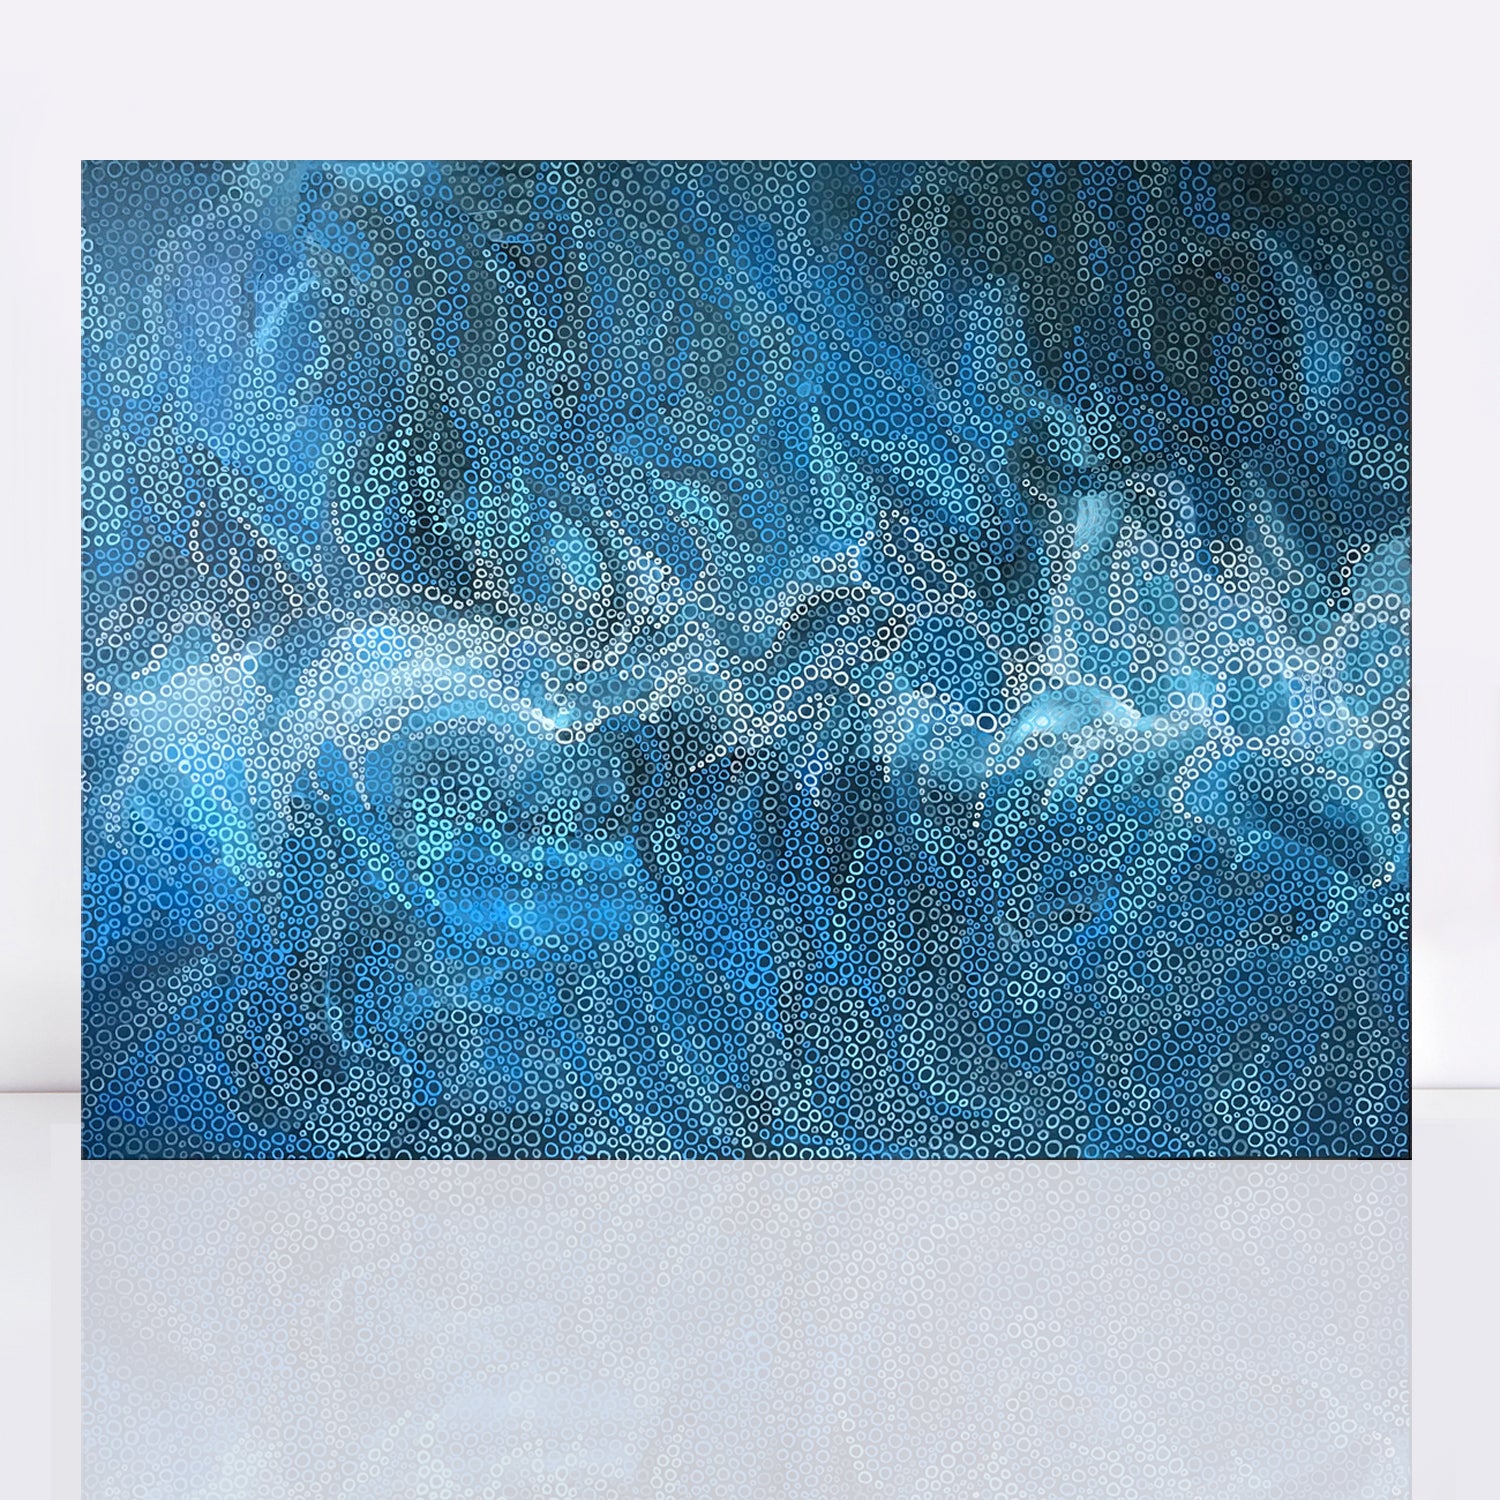 abstract painting of ocean waves from above